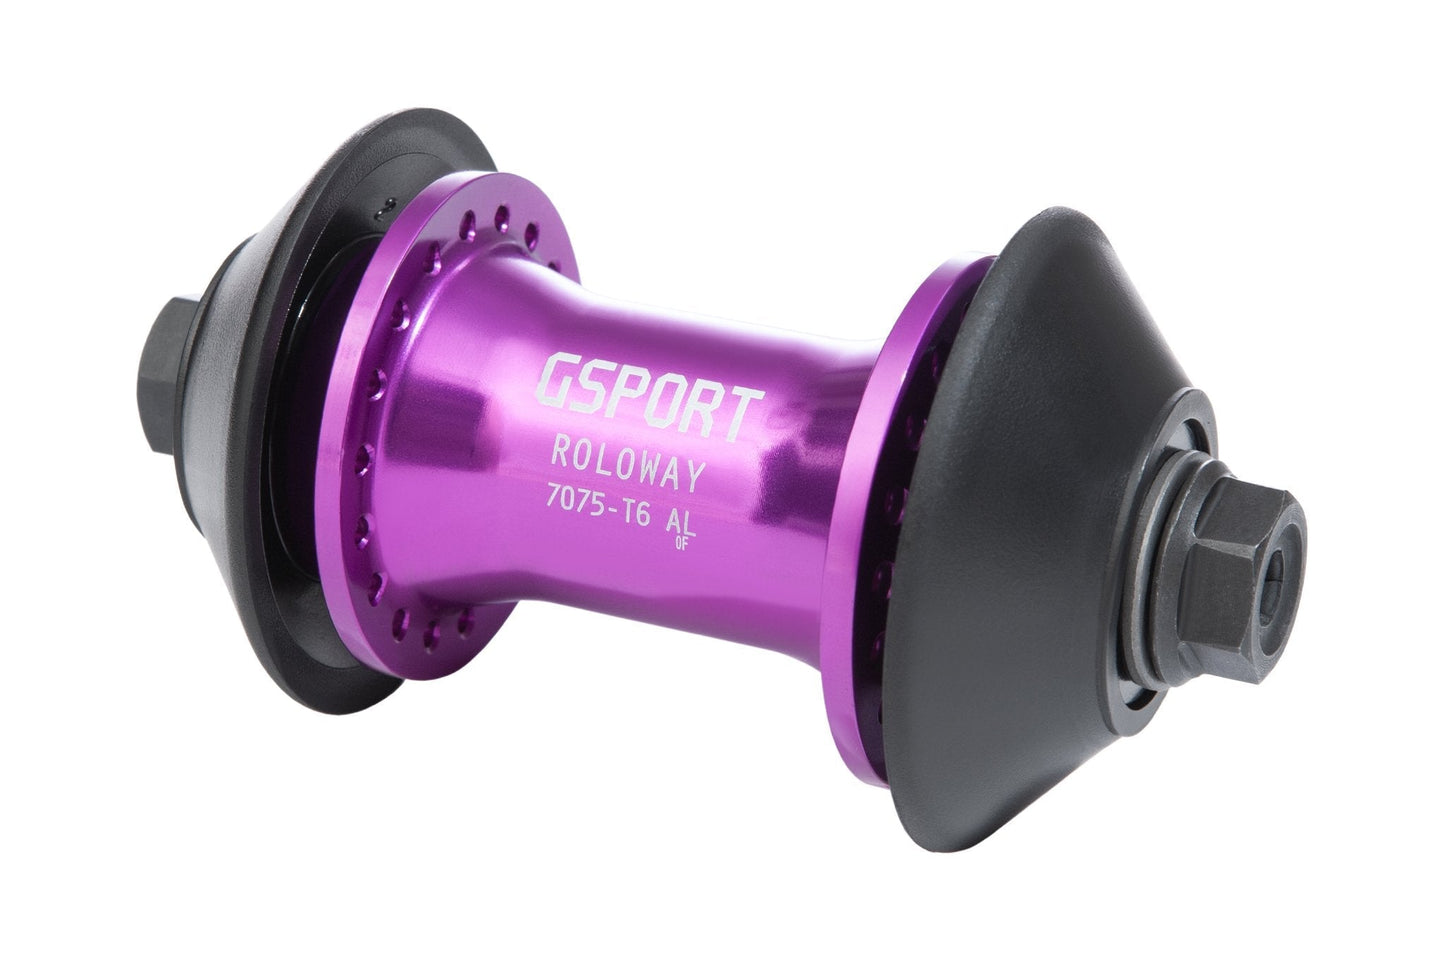 GSport Roloway Front Hub (Anodized Purple)